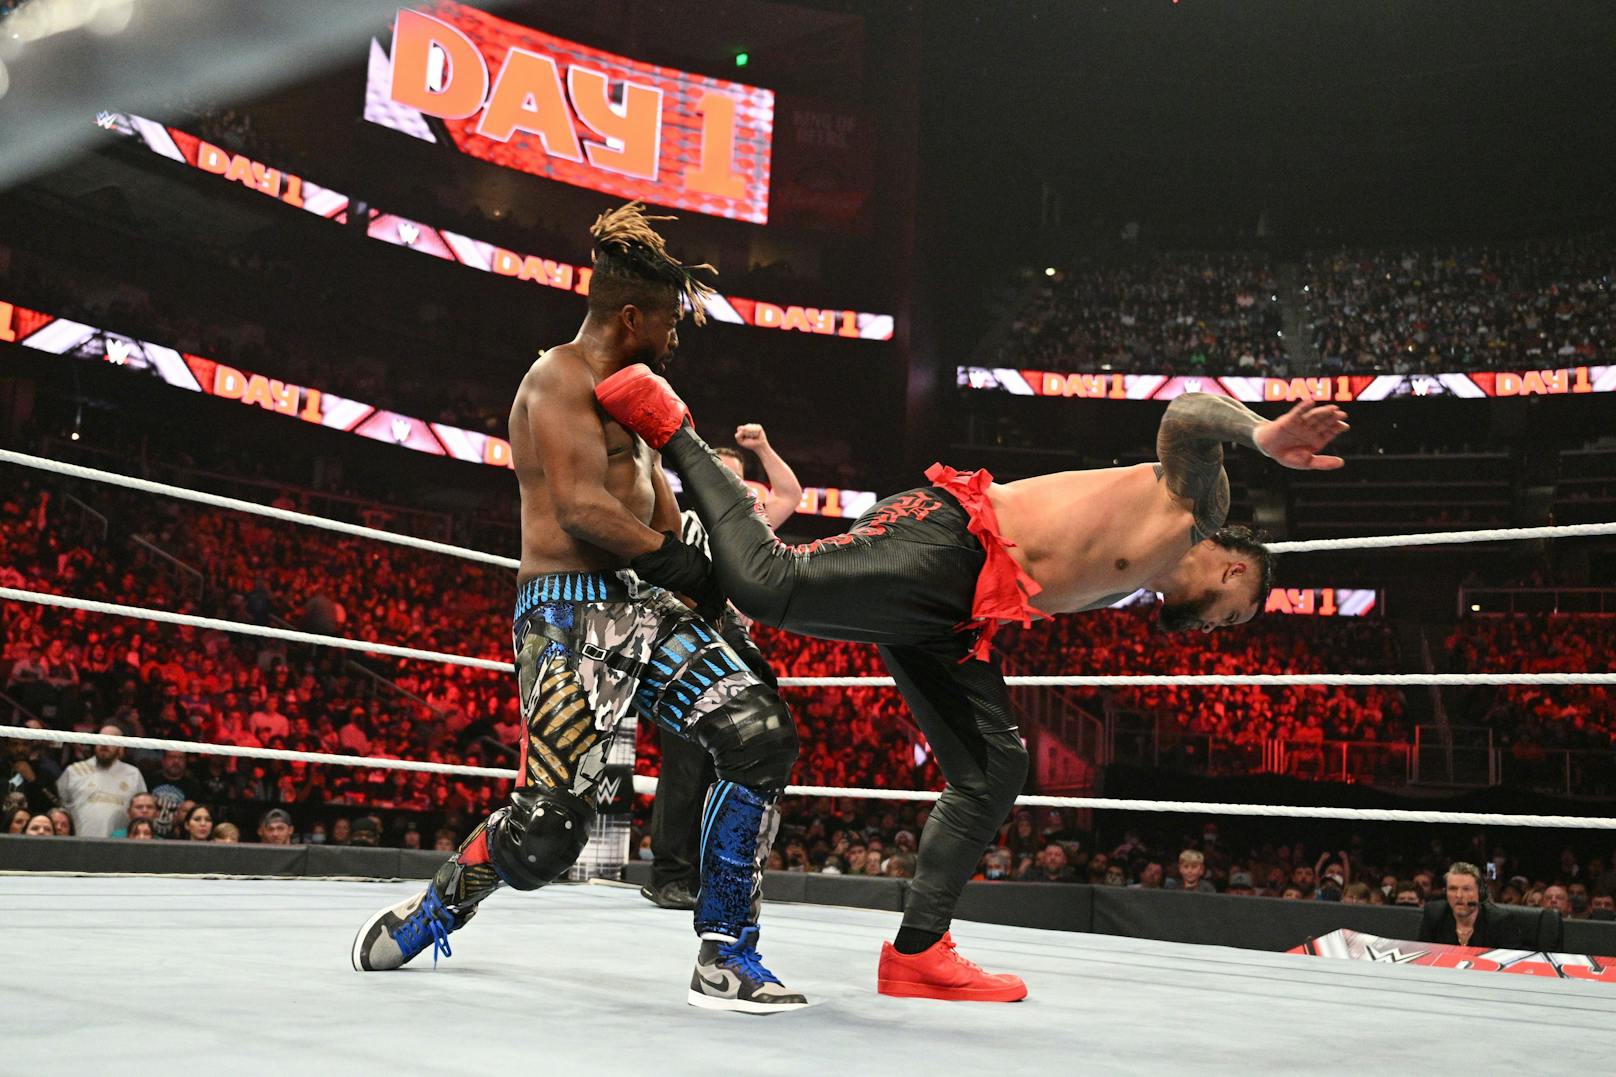 WWE Day 1: The Usos vs. The New Day